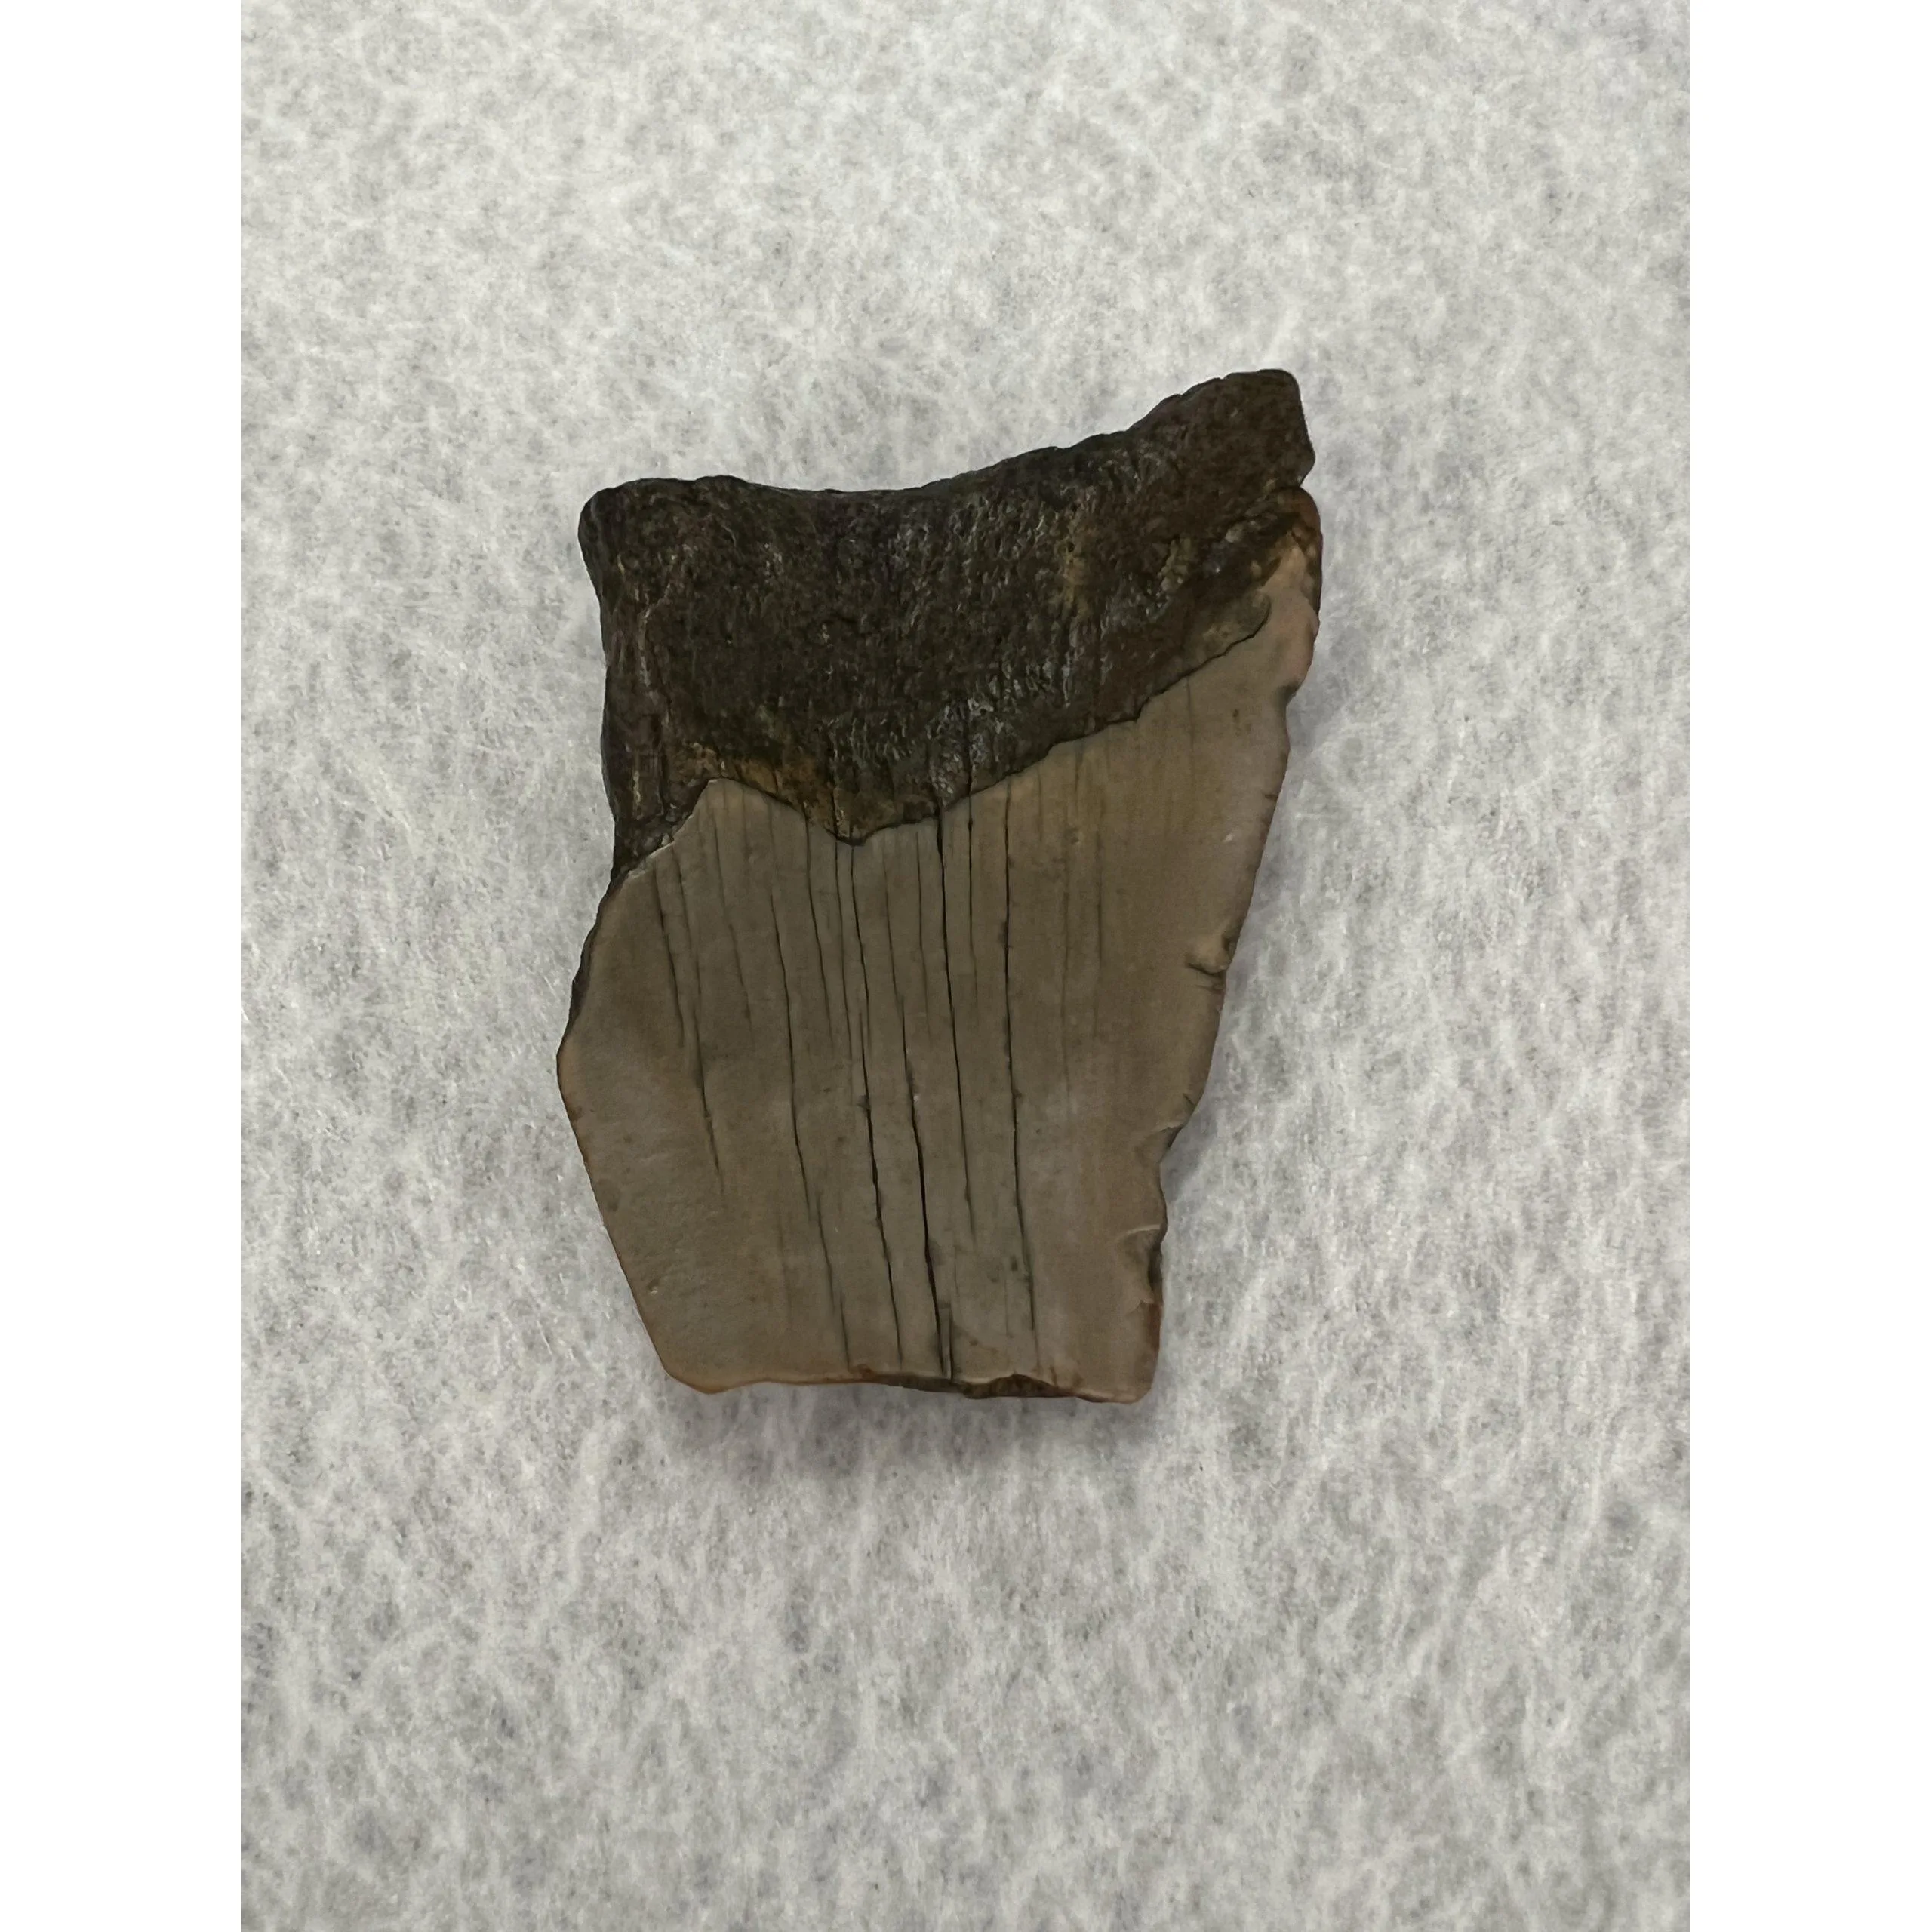 Megalodon Partial Tooth, South Carolina, 2.55 inch Prehistoric Online